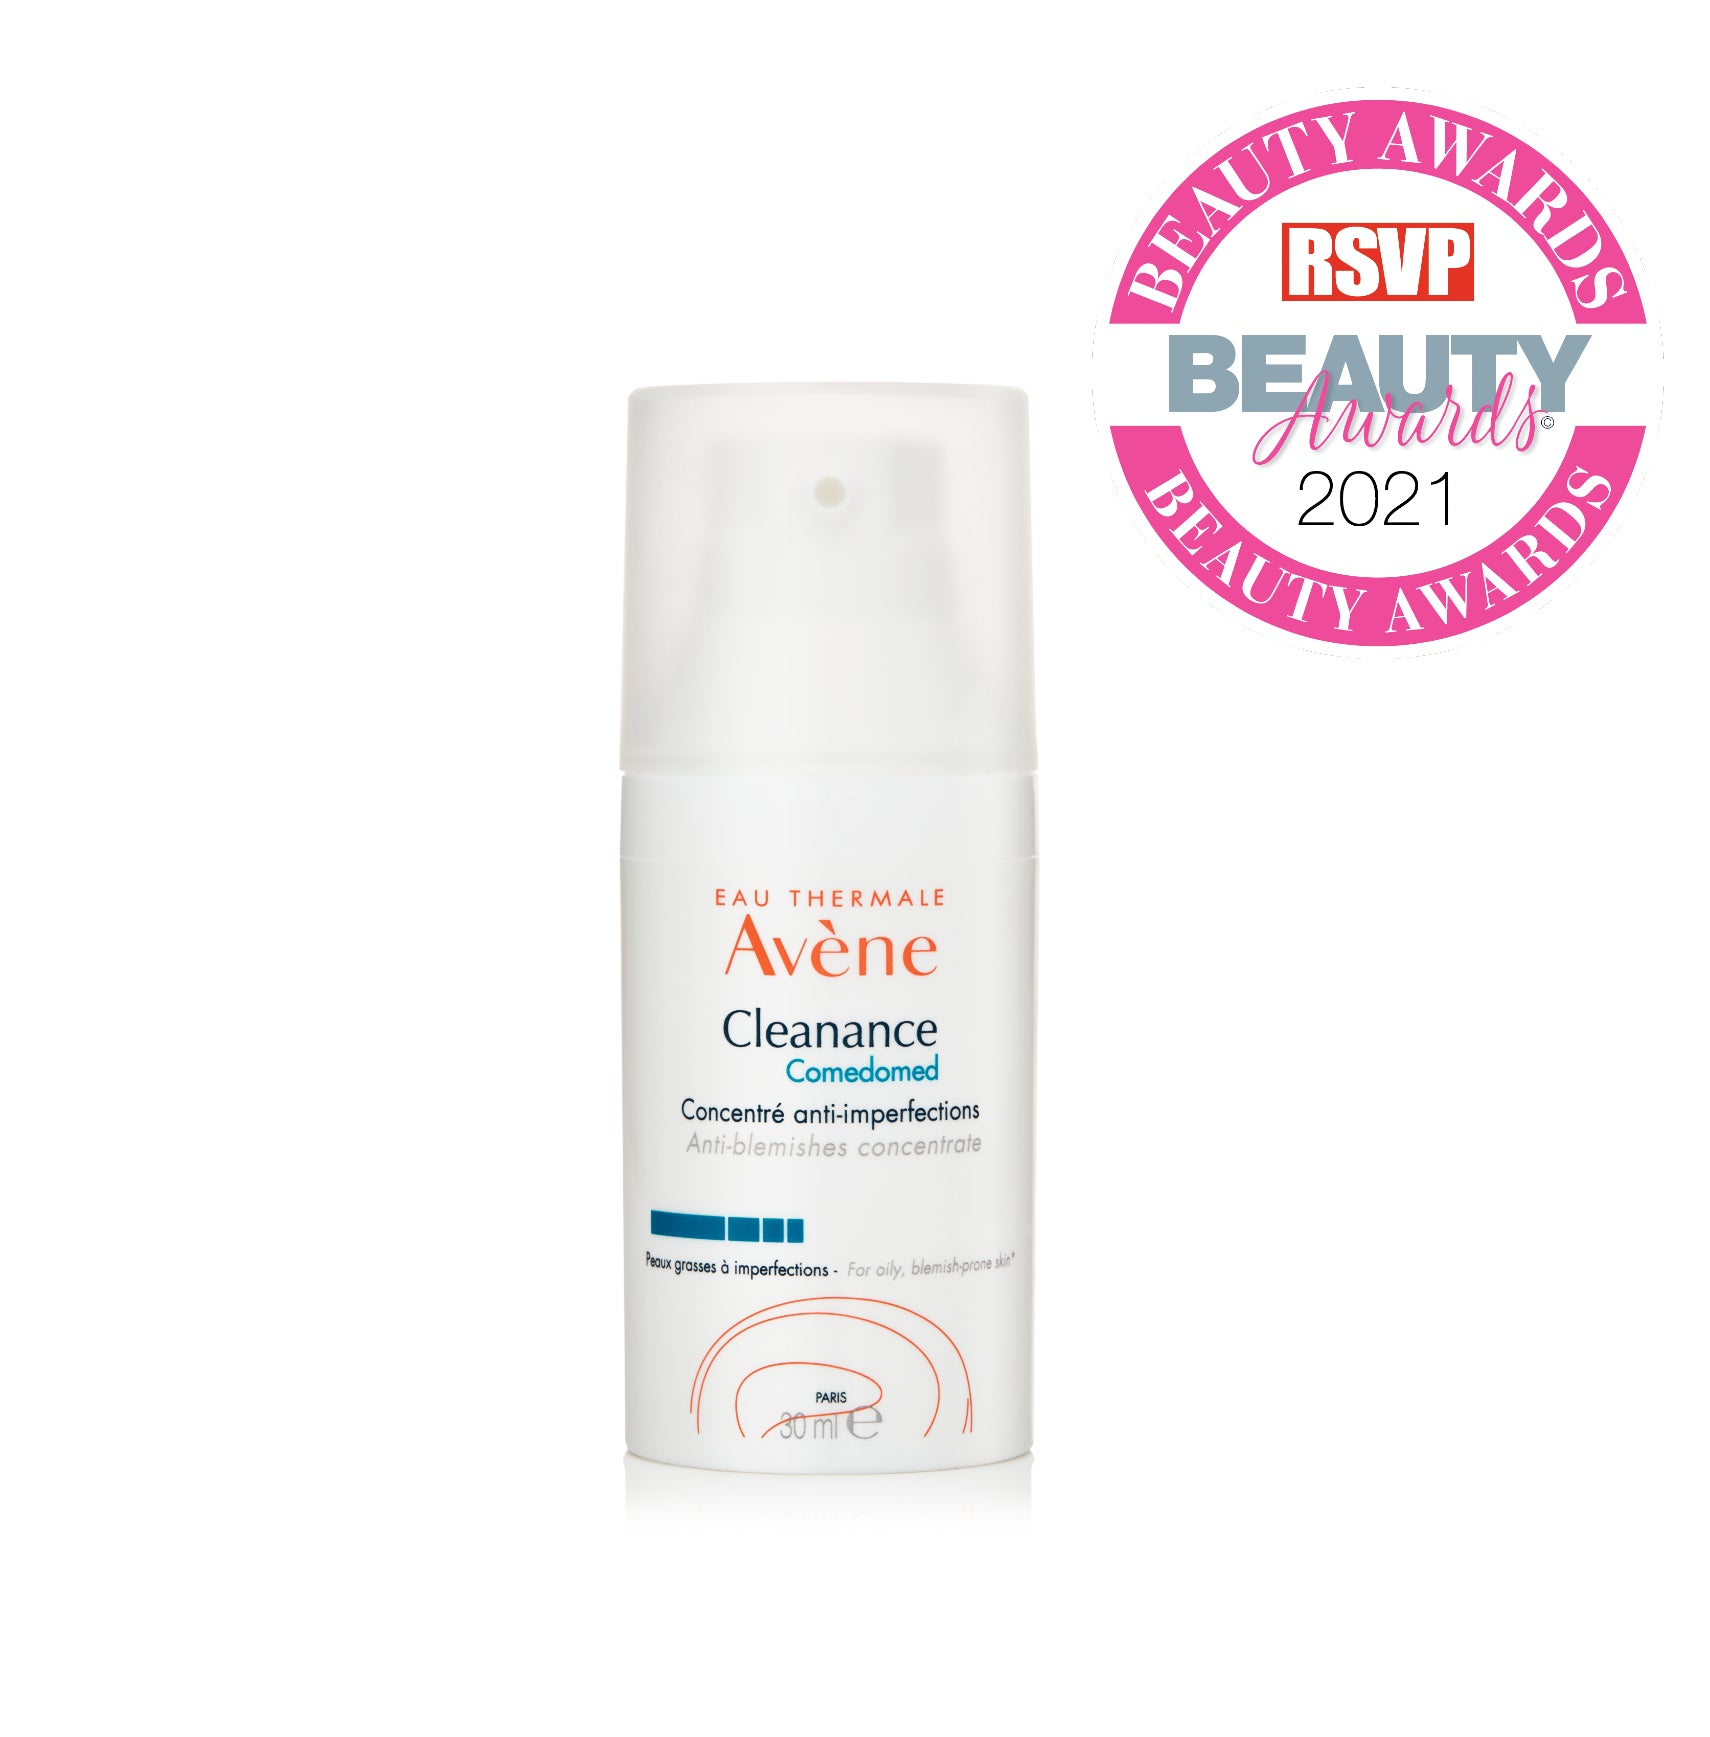 Avène Cleanance Comedomed Anti-Blemishes Concentrate 30ml – The